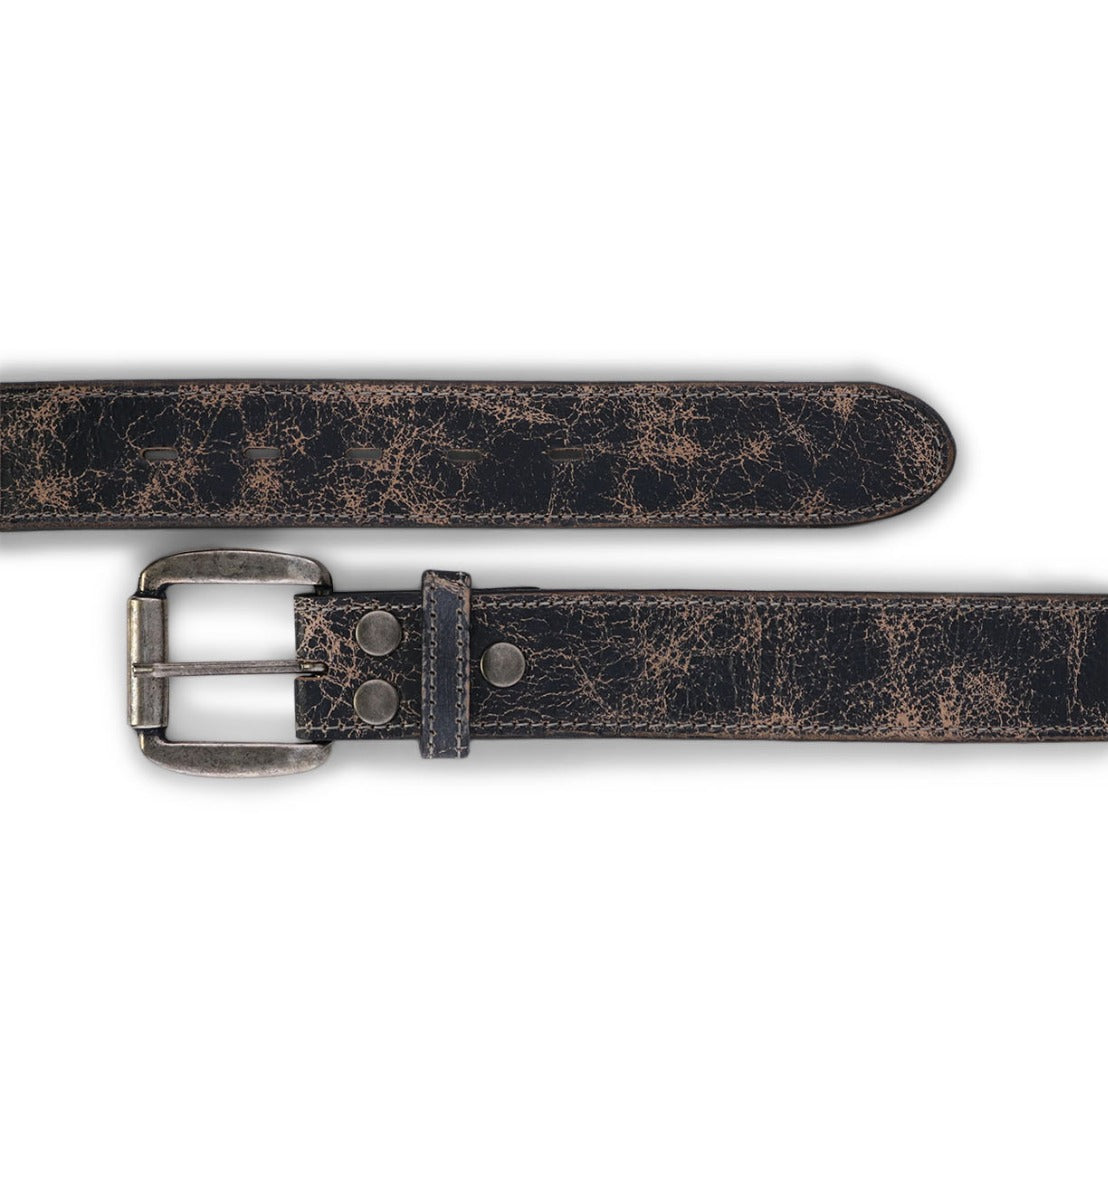 A Meander Black Lux Belt from Bed Stu, a vintage distressed leather belt with a metal buckle, displayed horizontally on a white background.